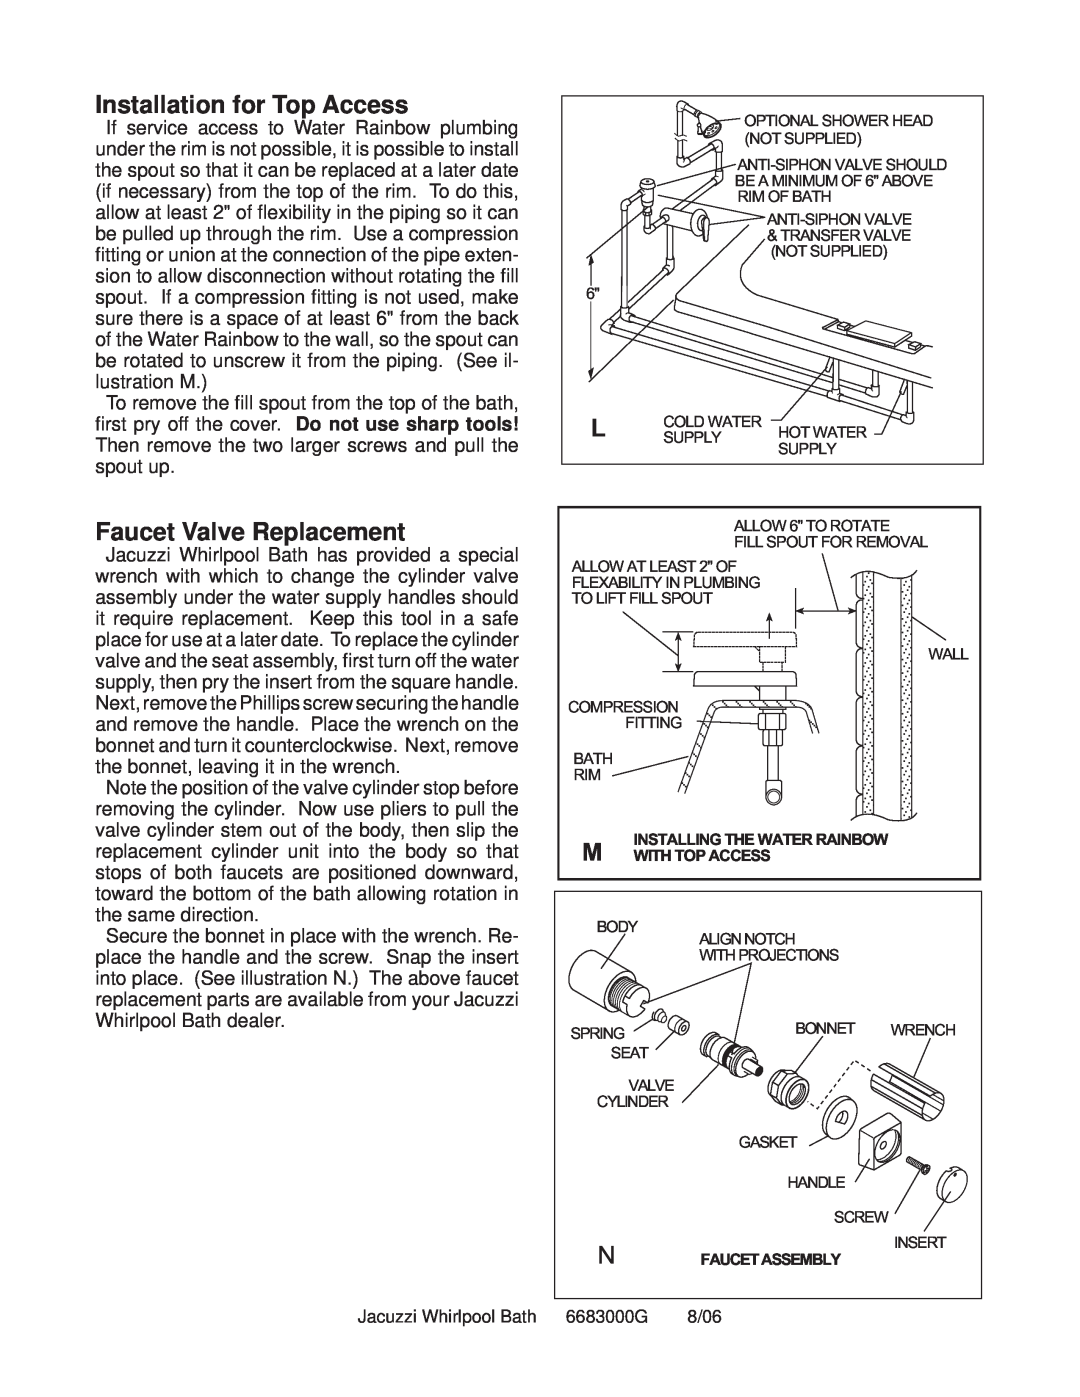 Jacuzzi Faucet Kit installation instructions Installation for Top Access, Faucet Valve Replacement 